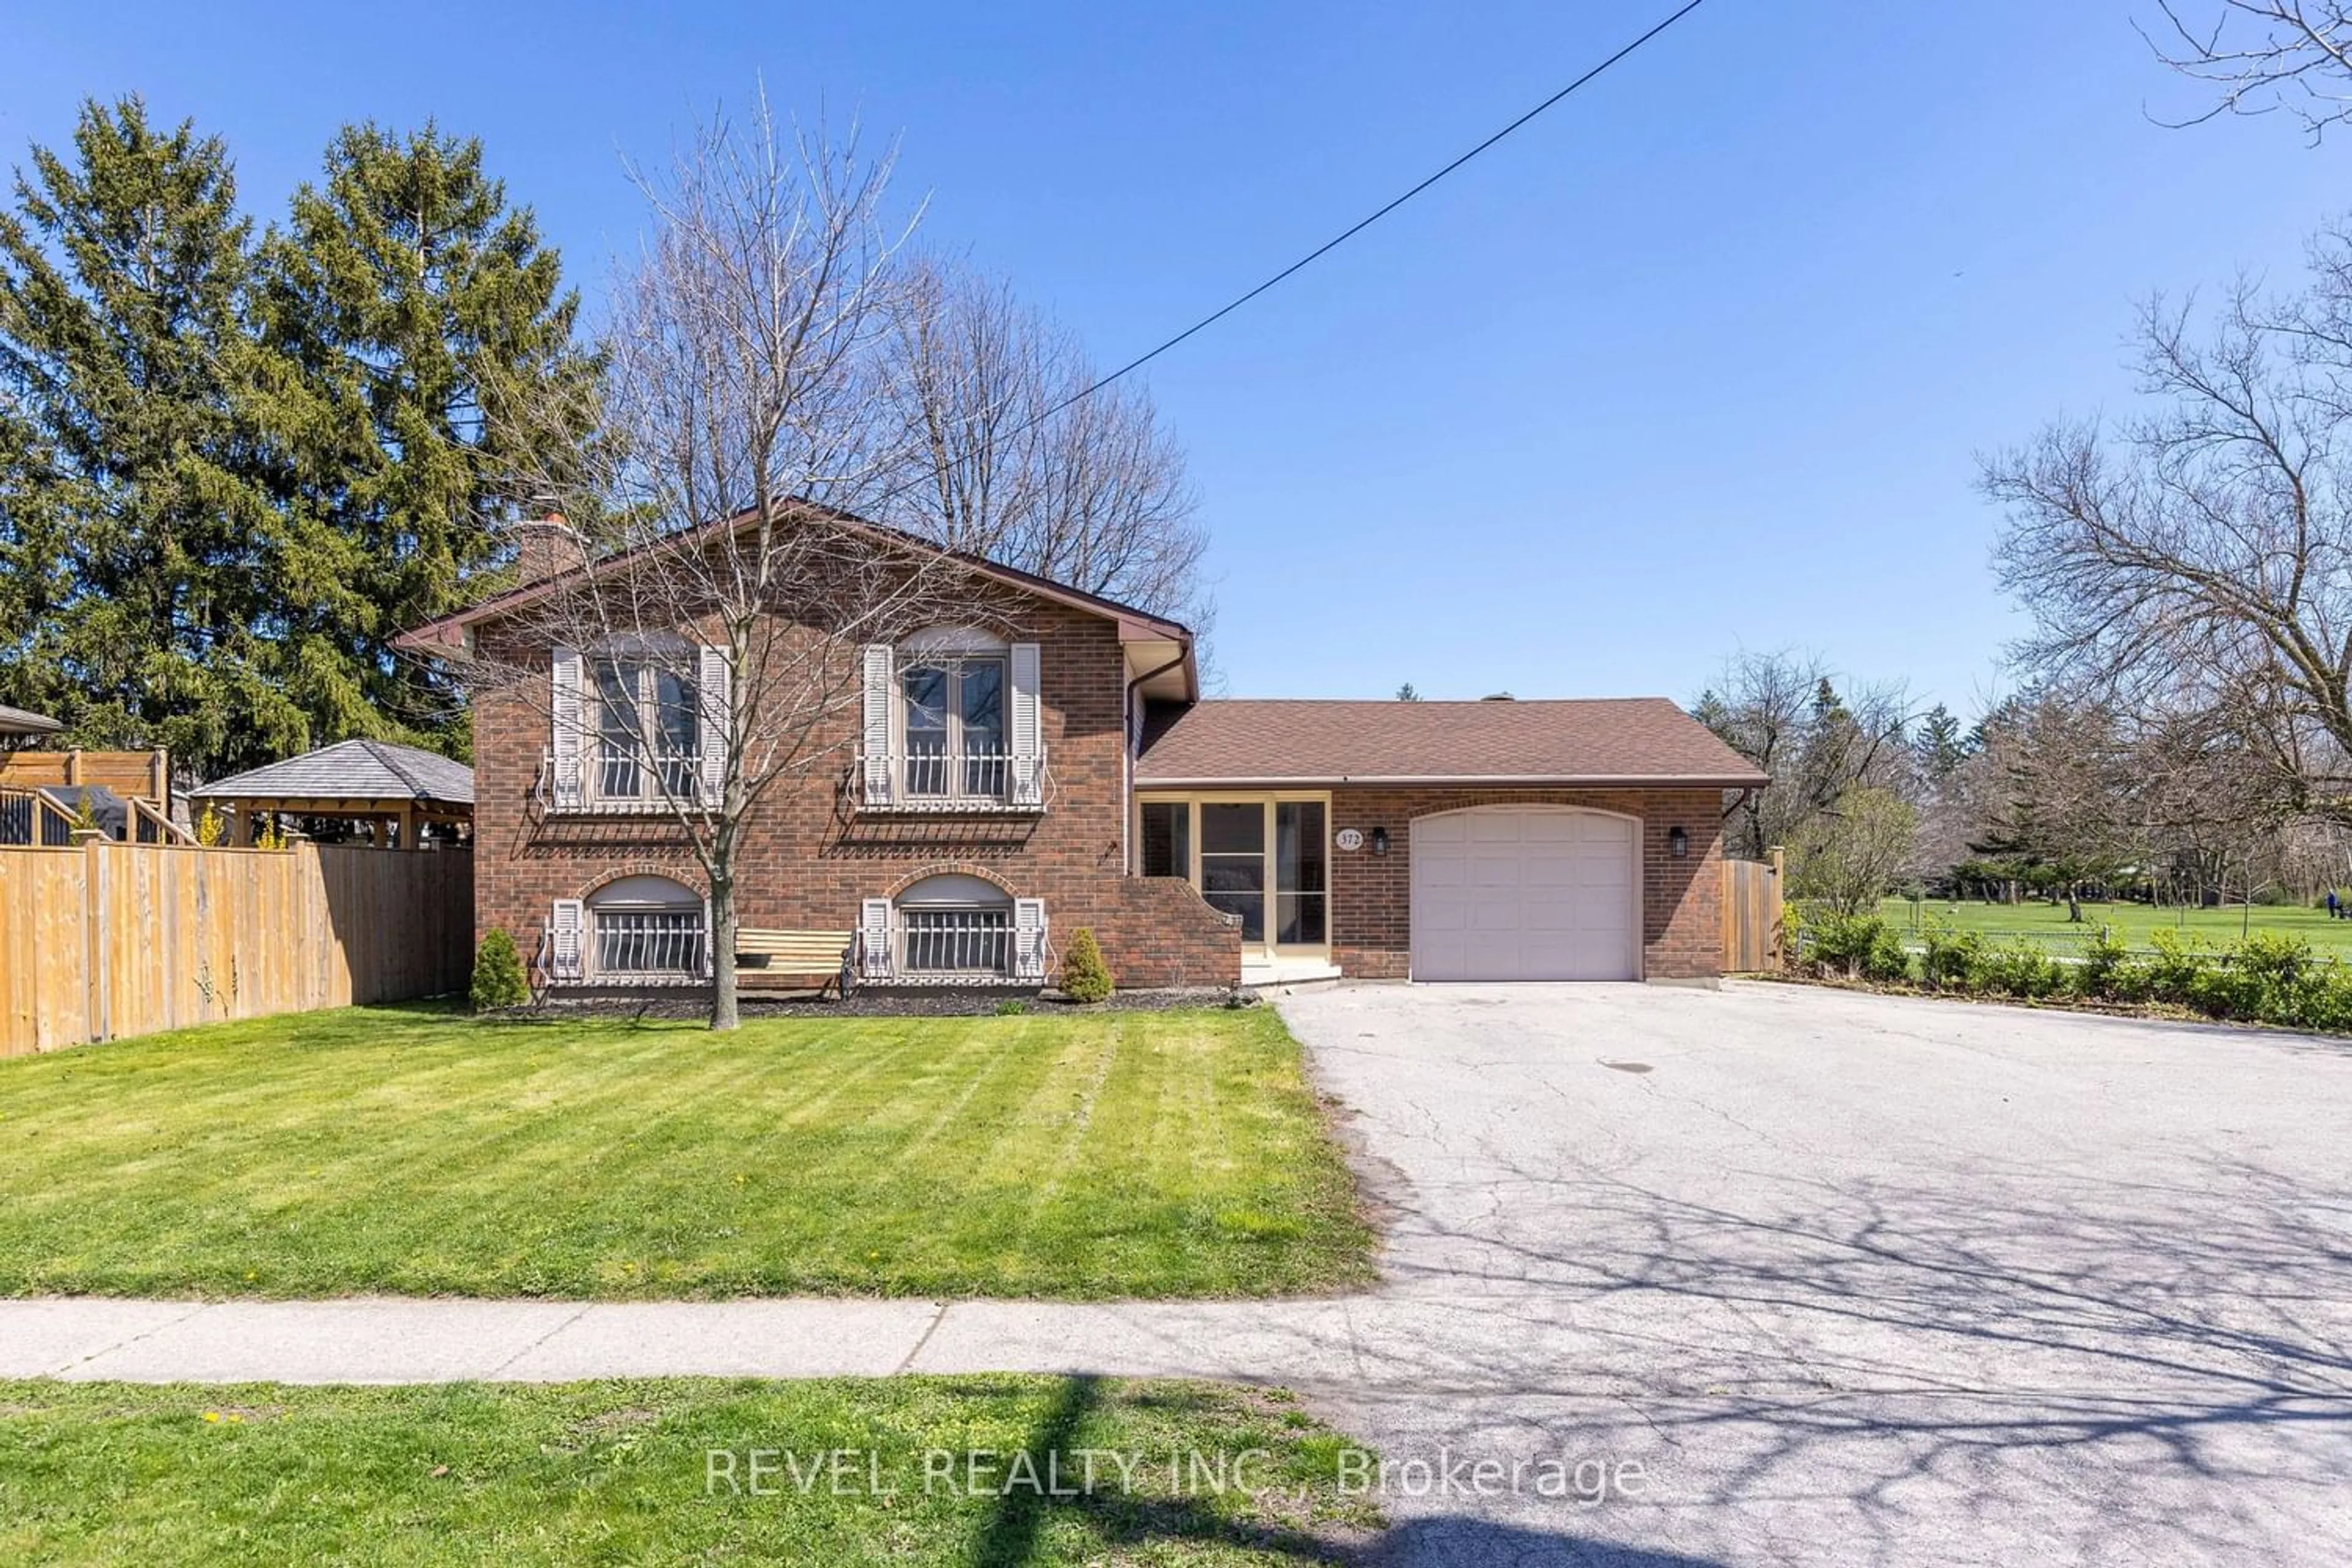 Frontside or backside of a home for 372 Niagara St, St. Catharines Ontario L2M 4W1